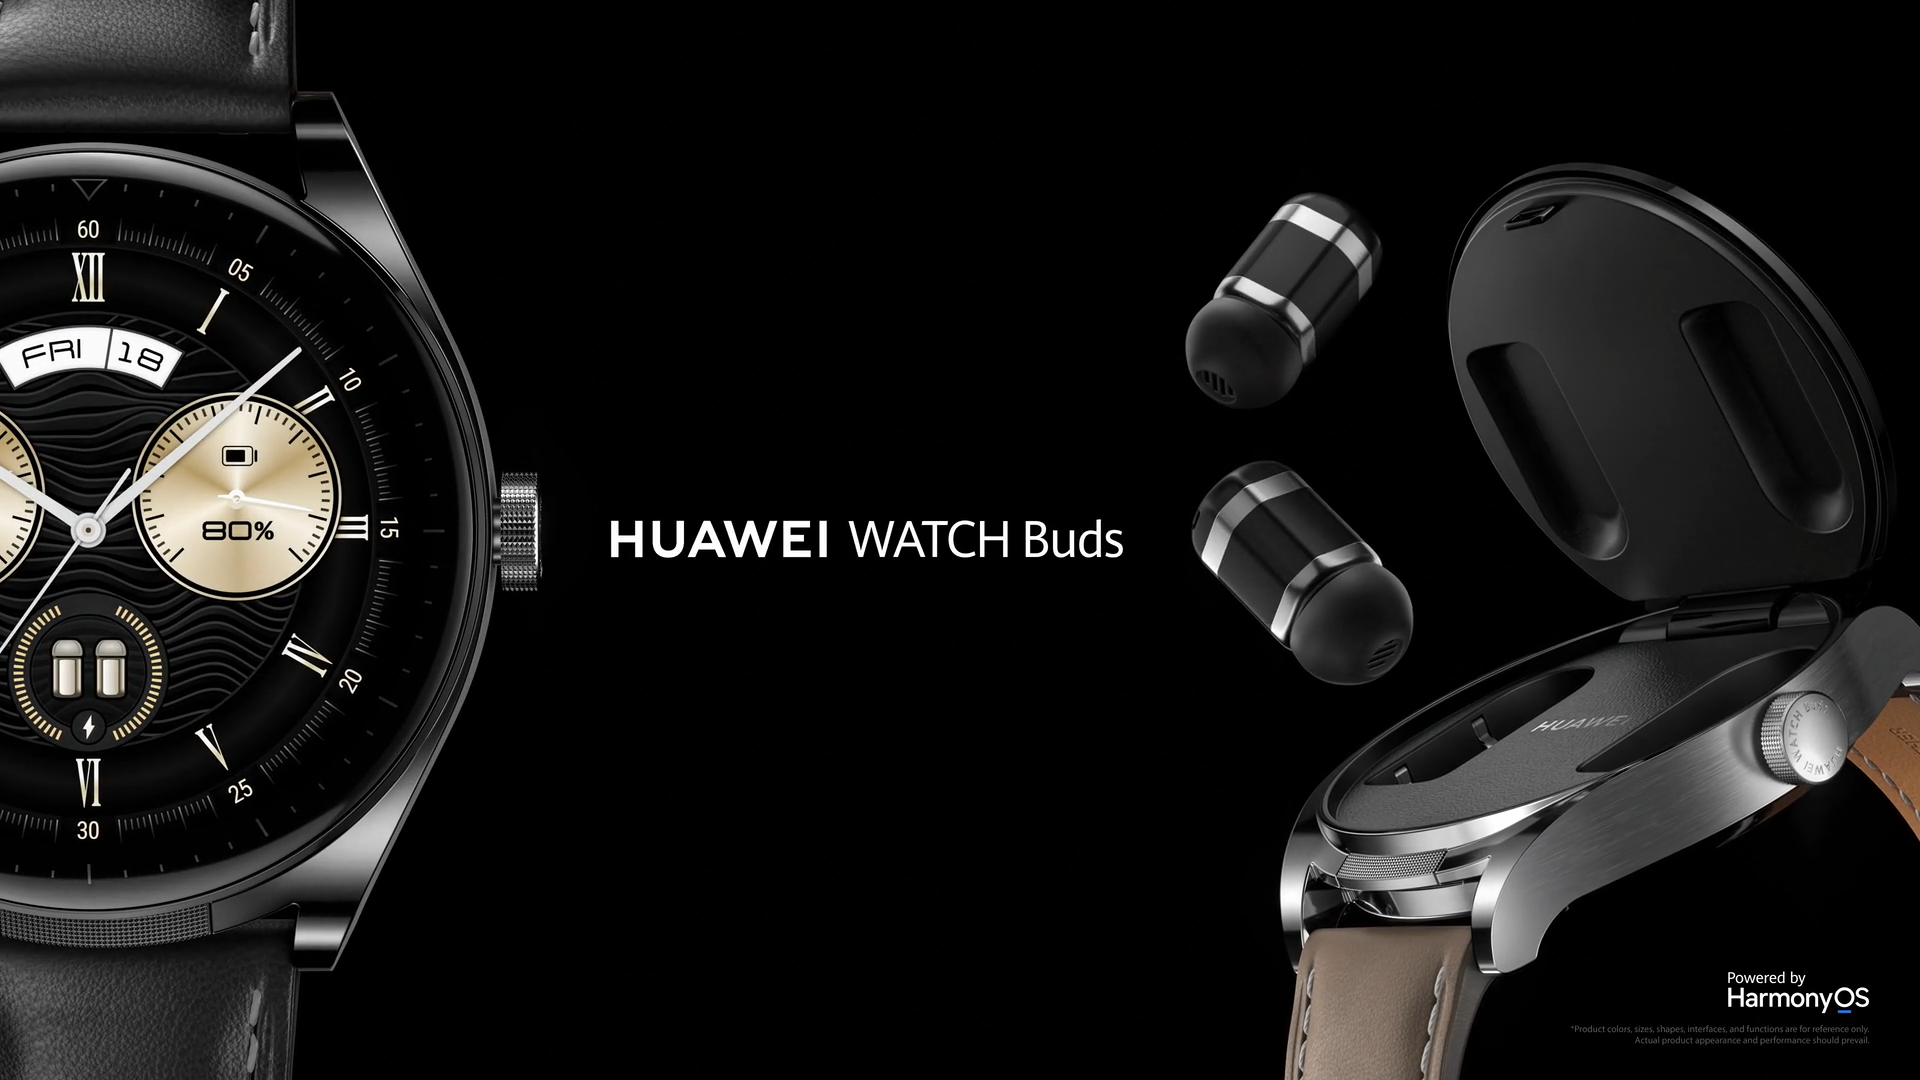 Huawei's Watch Buds ask: “What if your smartwatch also contained earbuds?”